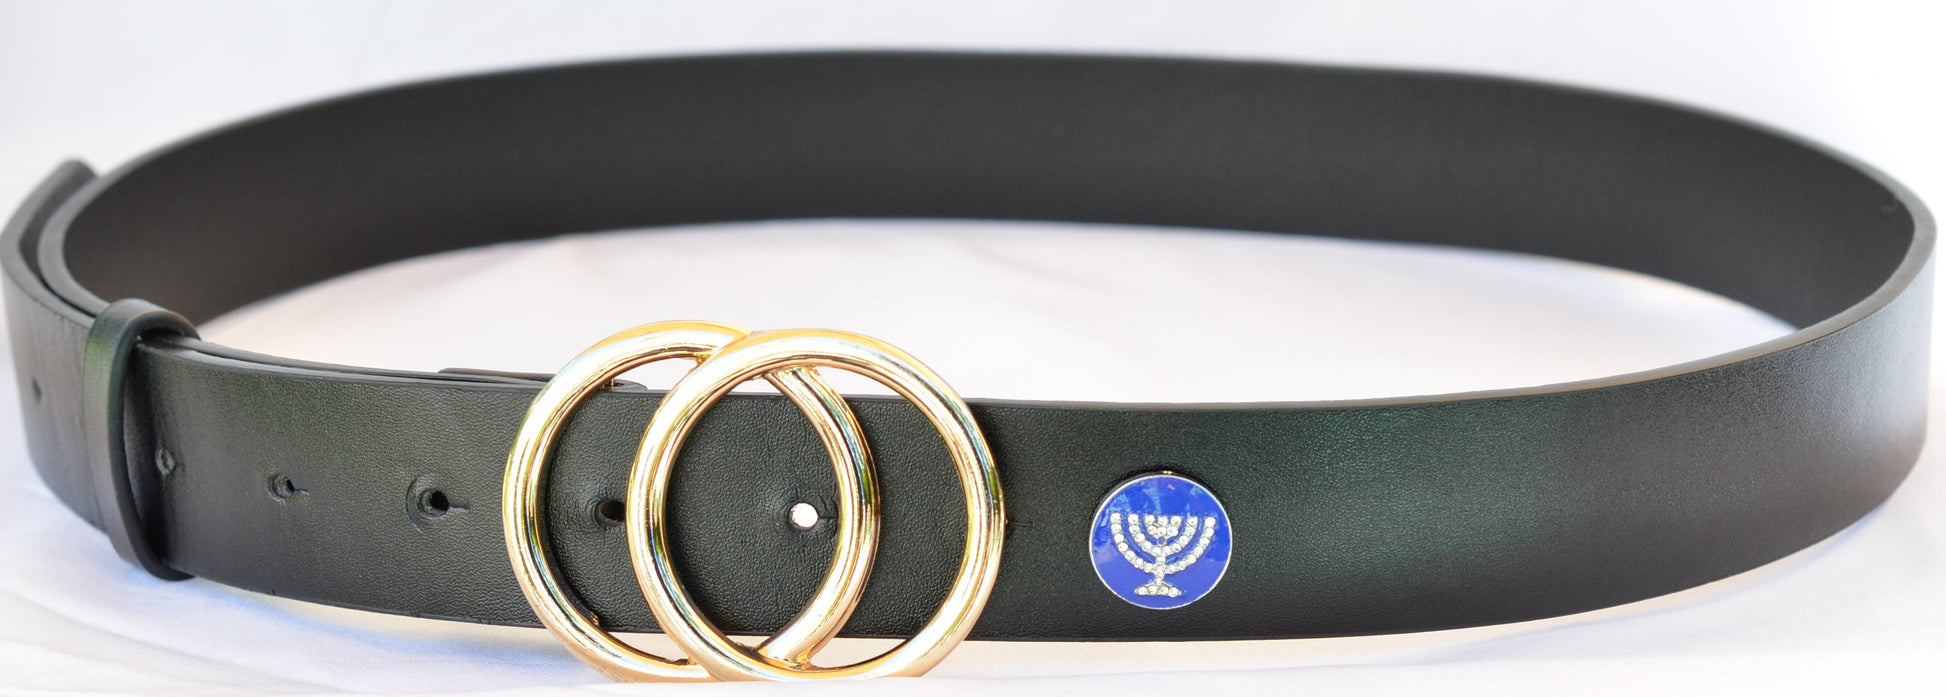 Hannukah Charm for Belts and Bags